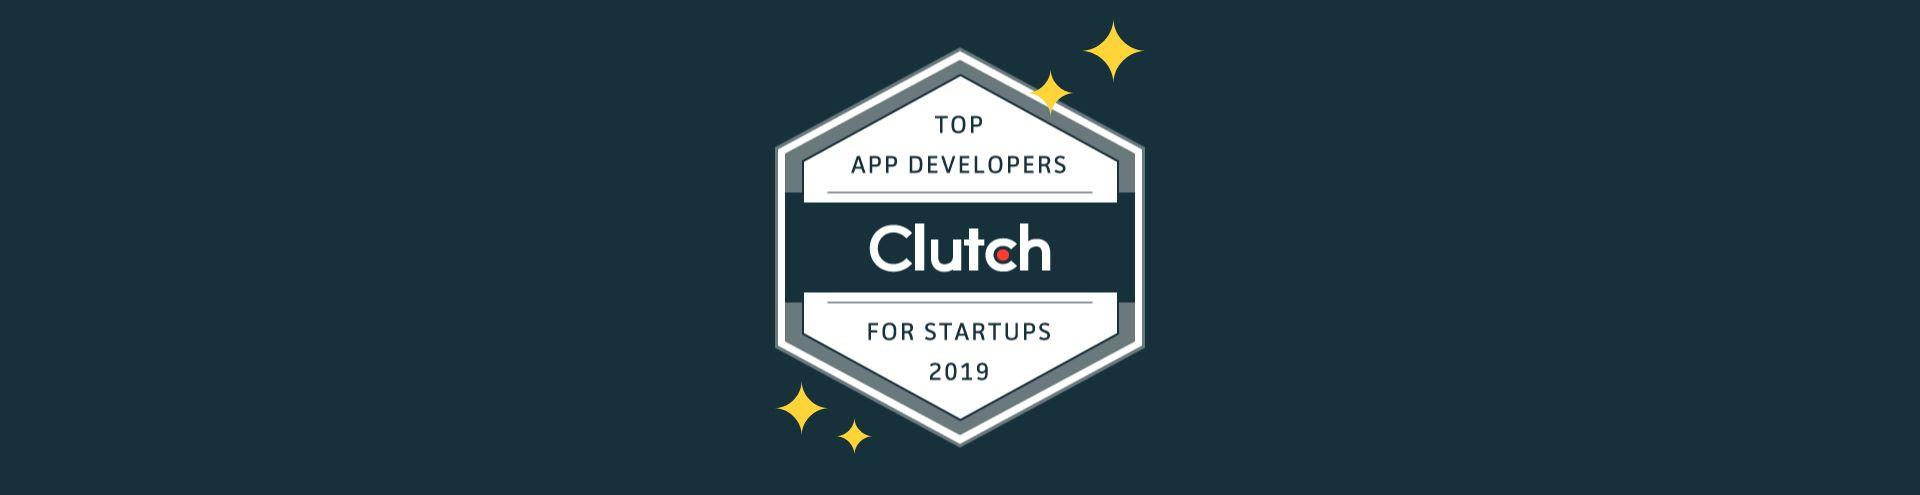 Apiko Proud to be Named a Top App Development Partner by Clutch!